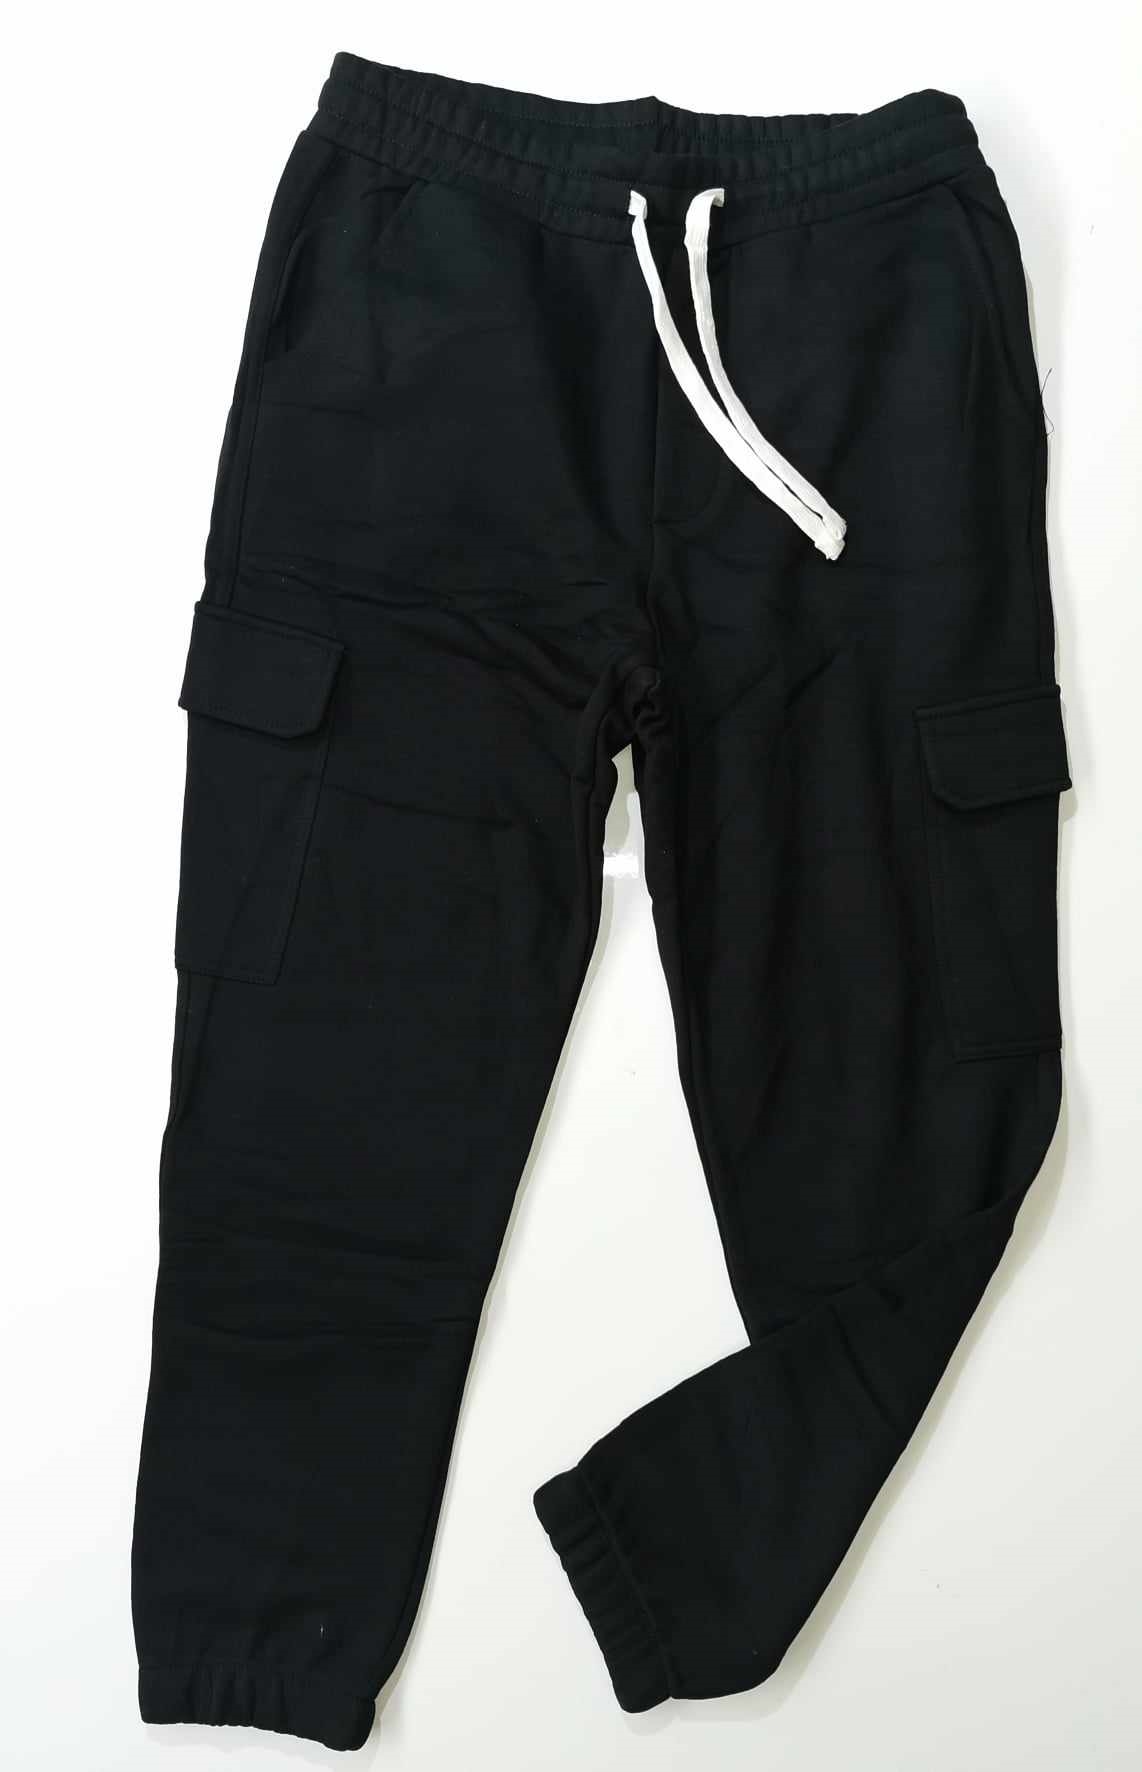 TROUSER ENOS CO 24/24 MONOC. TRACK WITH POCKETS ΜΑΝ